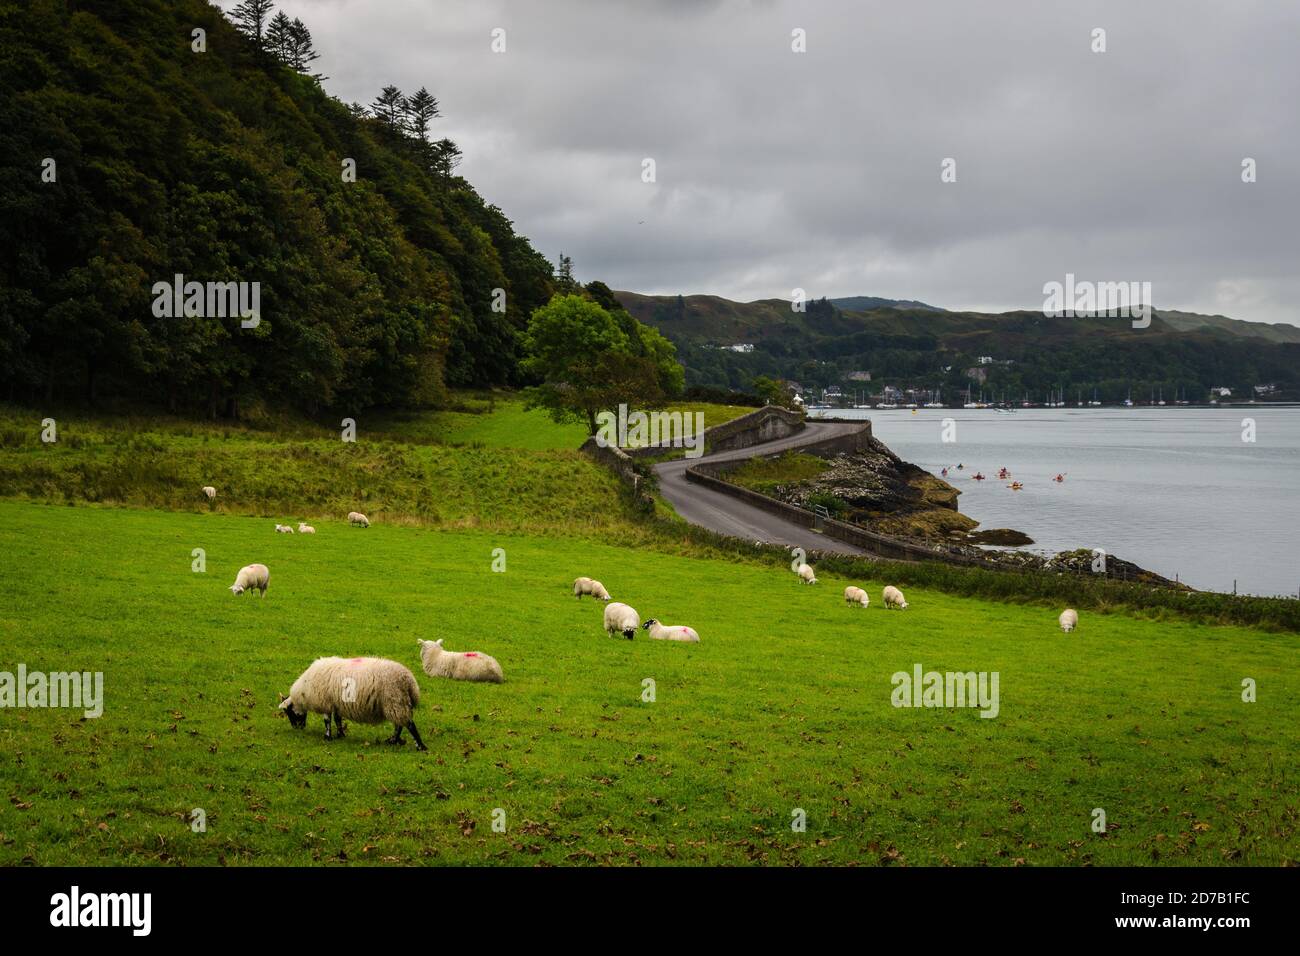 The Oban bay from Argyll with a flock of sheep in the foreground, Scotland, United Kingdom Stock Photo